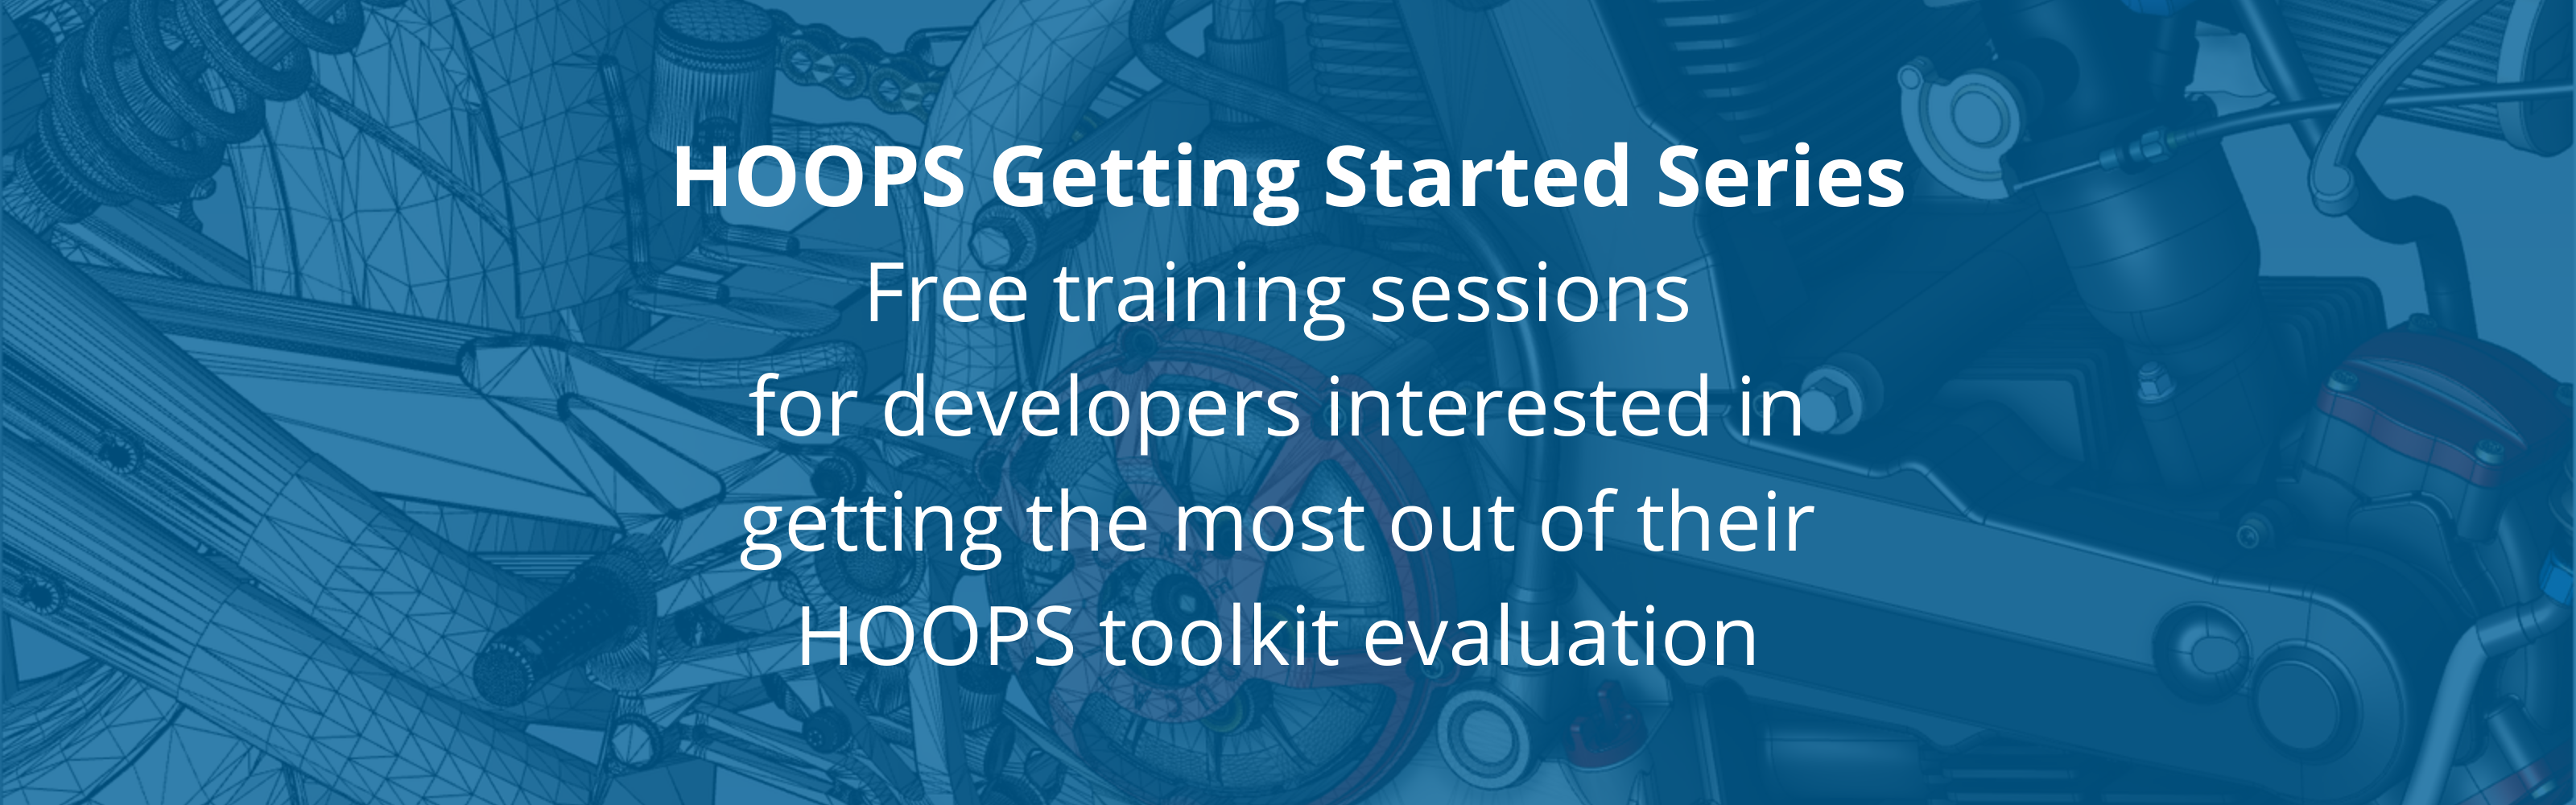 HOOPS Getting Started Series Free training sessions for developers interested in getting the most out of their HOOPS toolkit evaluation (1)-1